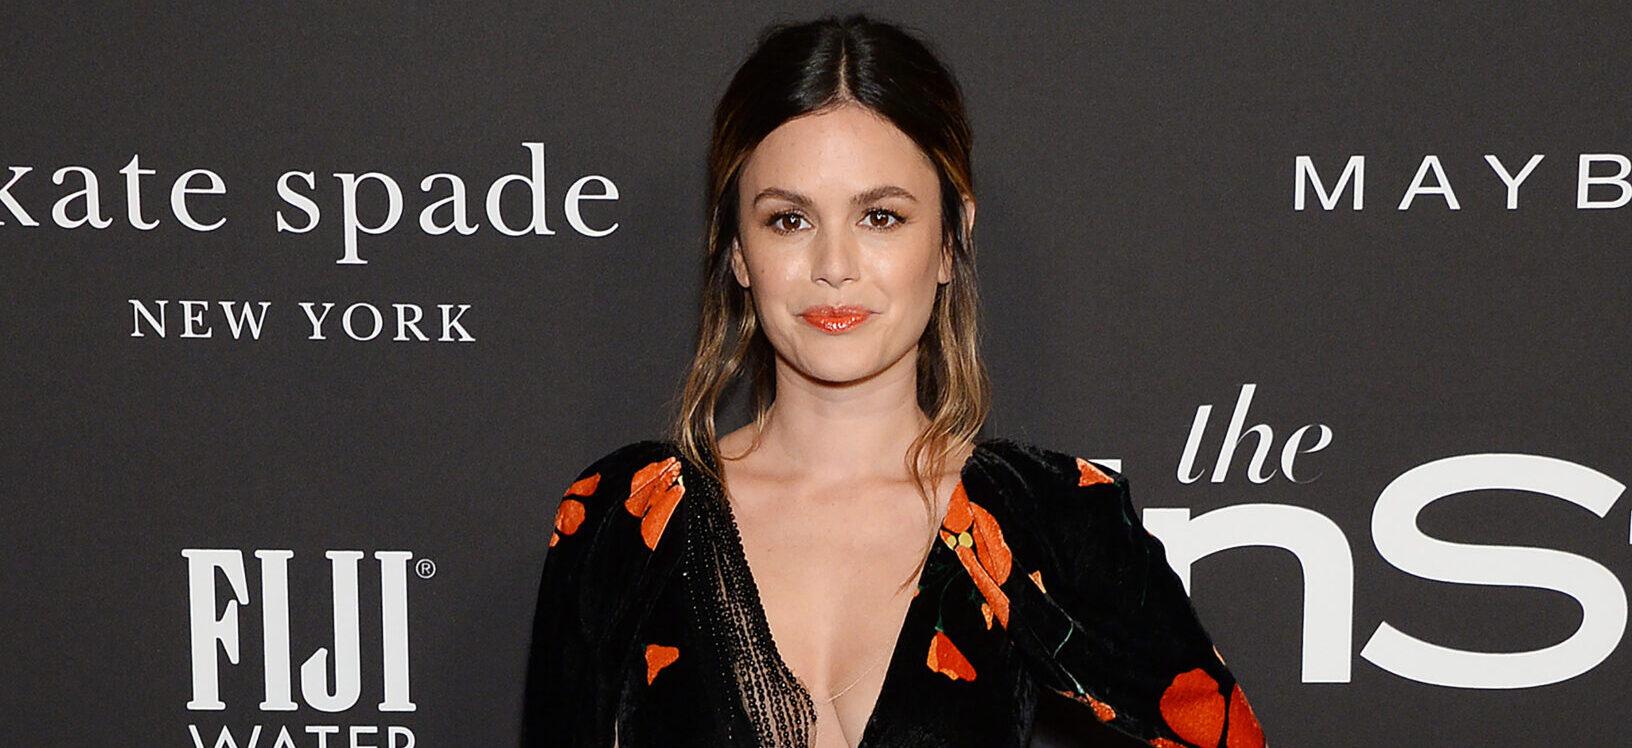 Rachel Bilson Makes ‘Judgmental’ Claim About Men In Their 40s Who Have ‘Only Slept With Four Women’